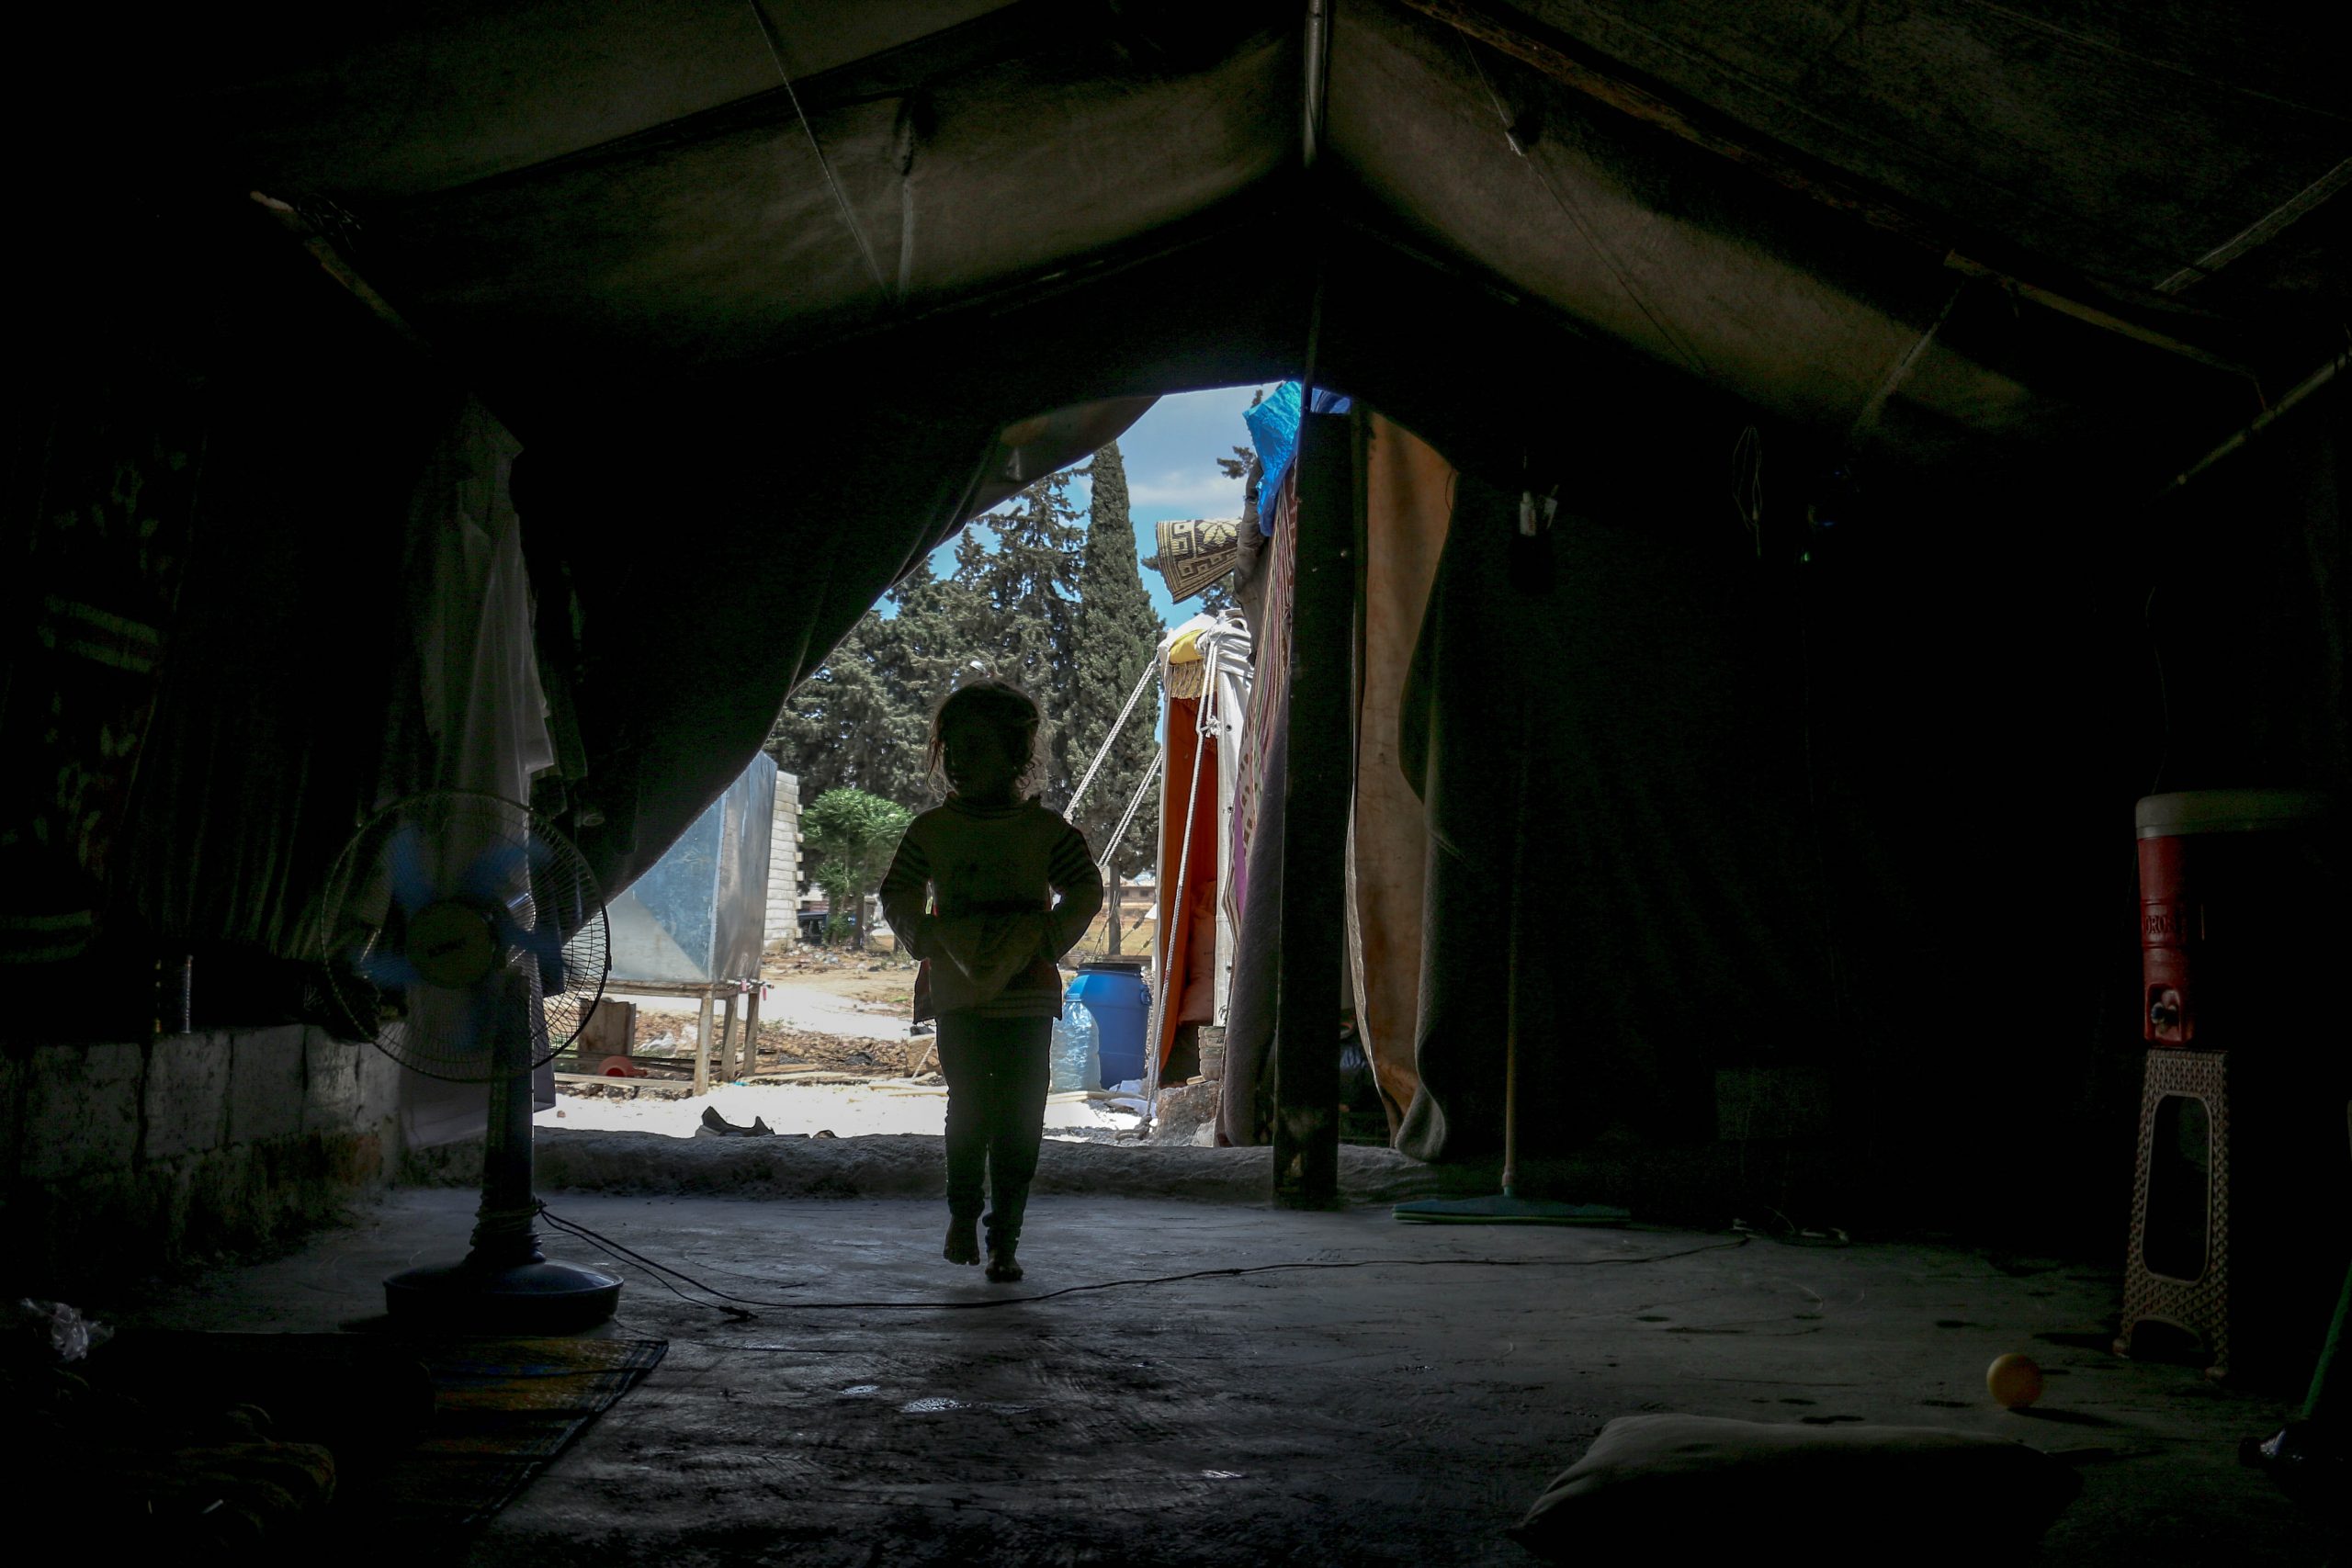 A child refugee is silhouetted beneath a tent. They walk away from the camera shrouded in darkness 